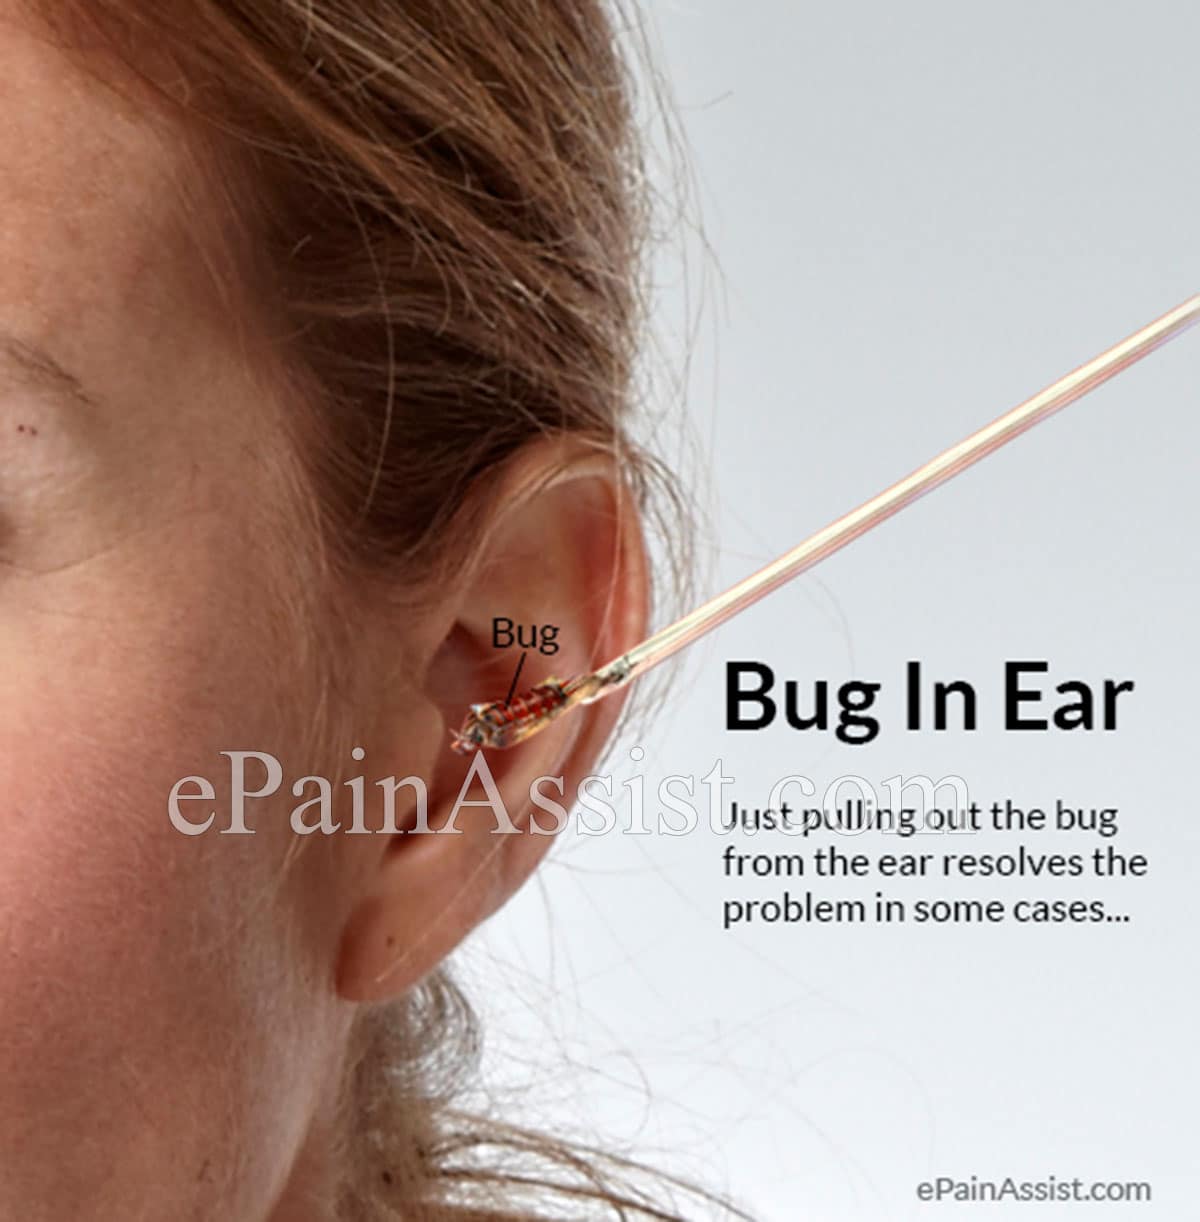 Bug In Ear: 7 Ways To Deal With Ear Pain and Discomfort in Ear